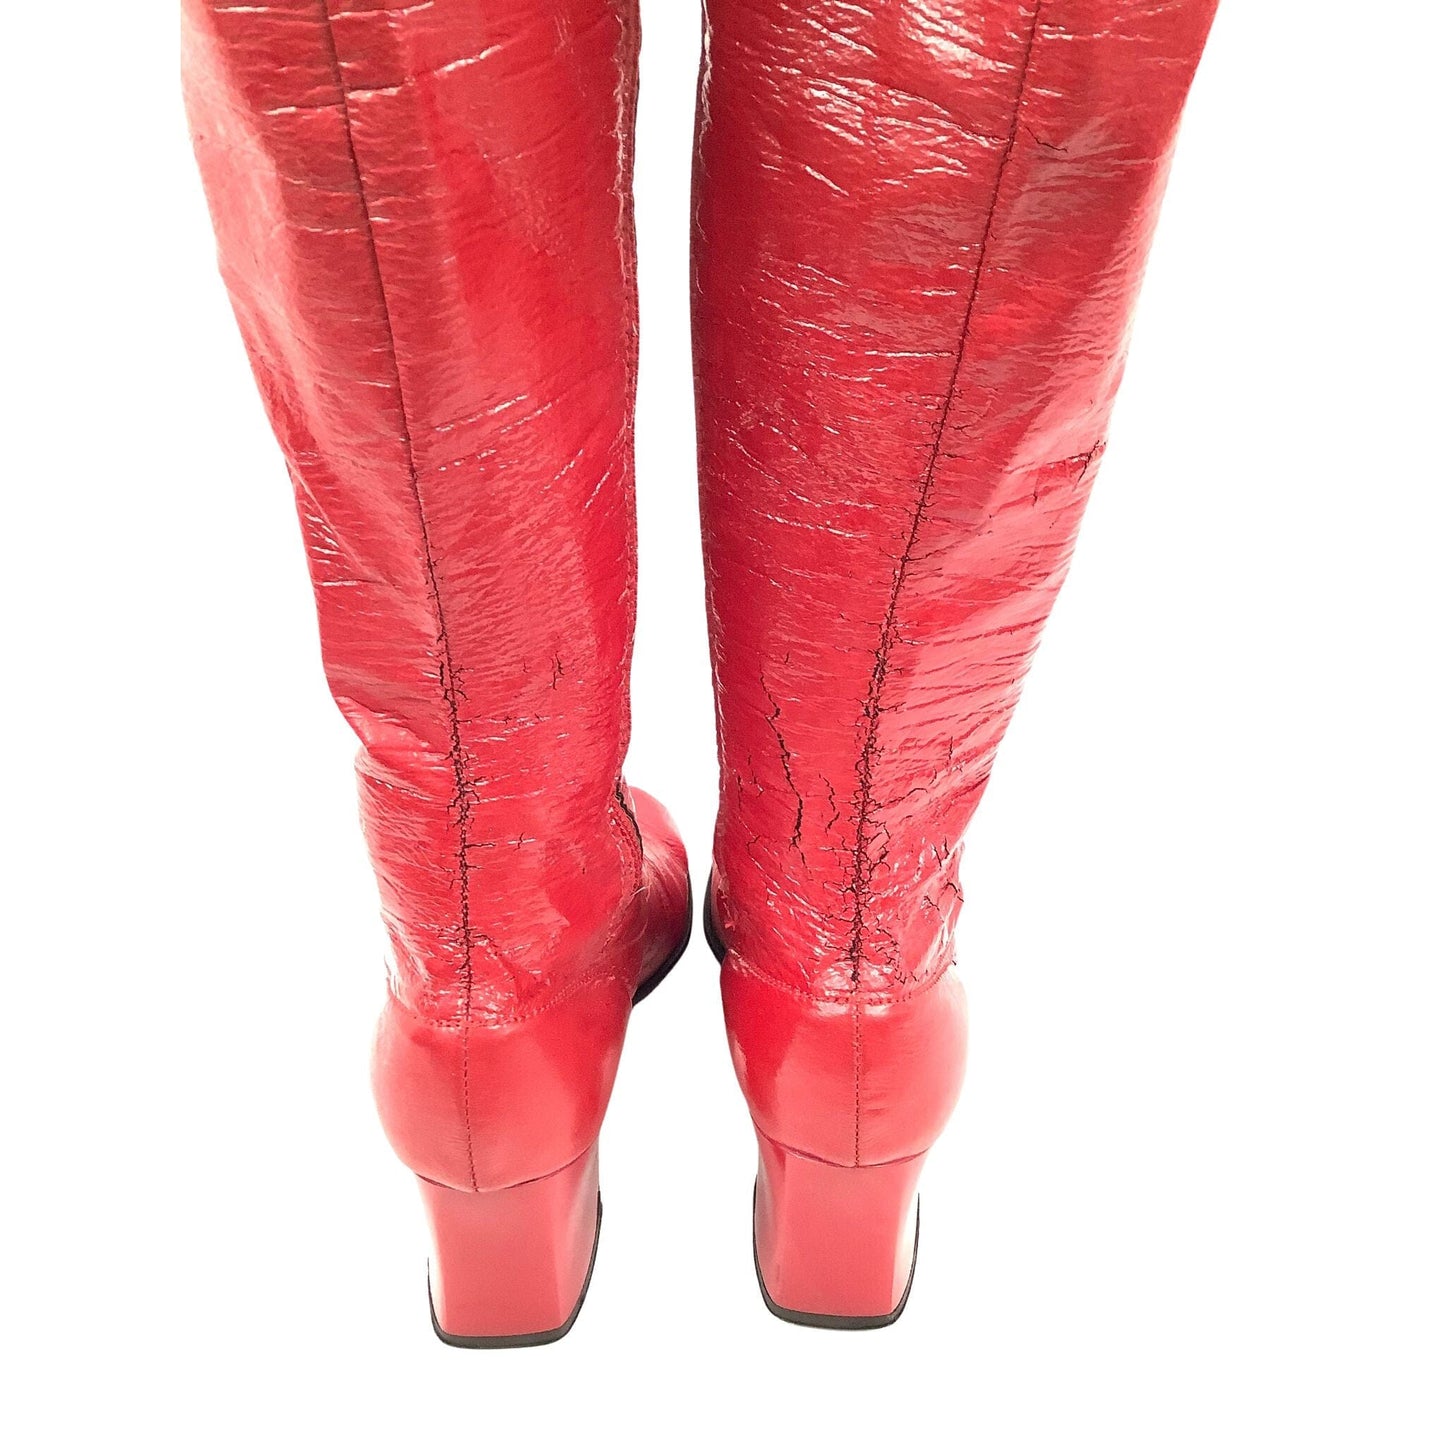 1960s Go-Go Fashion Boots 8 / Red / Vintage 1960s